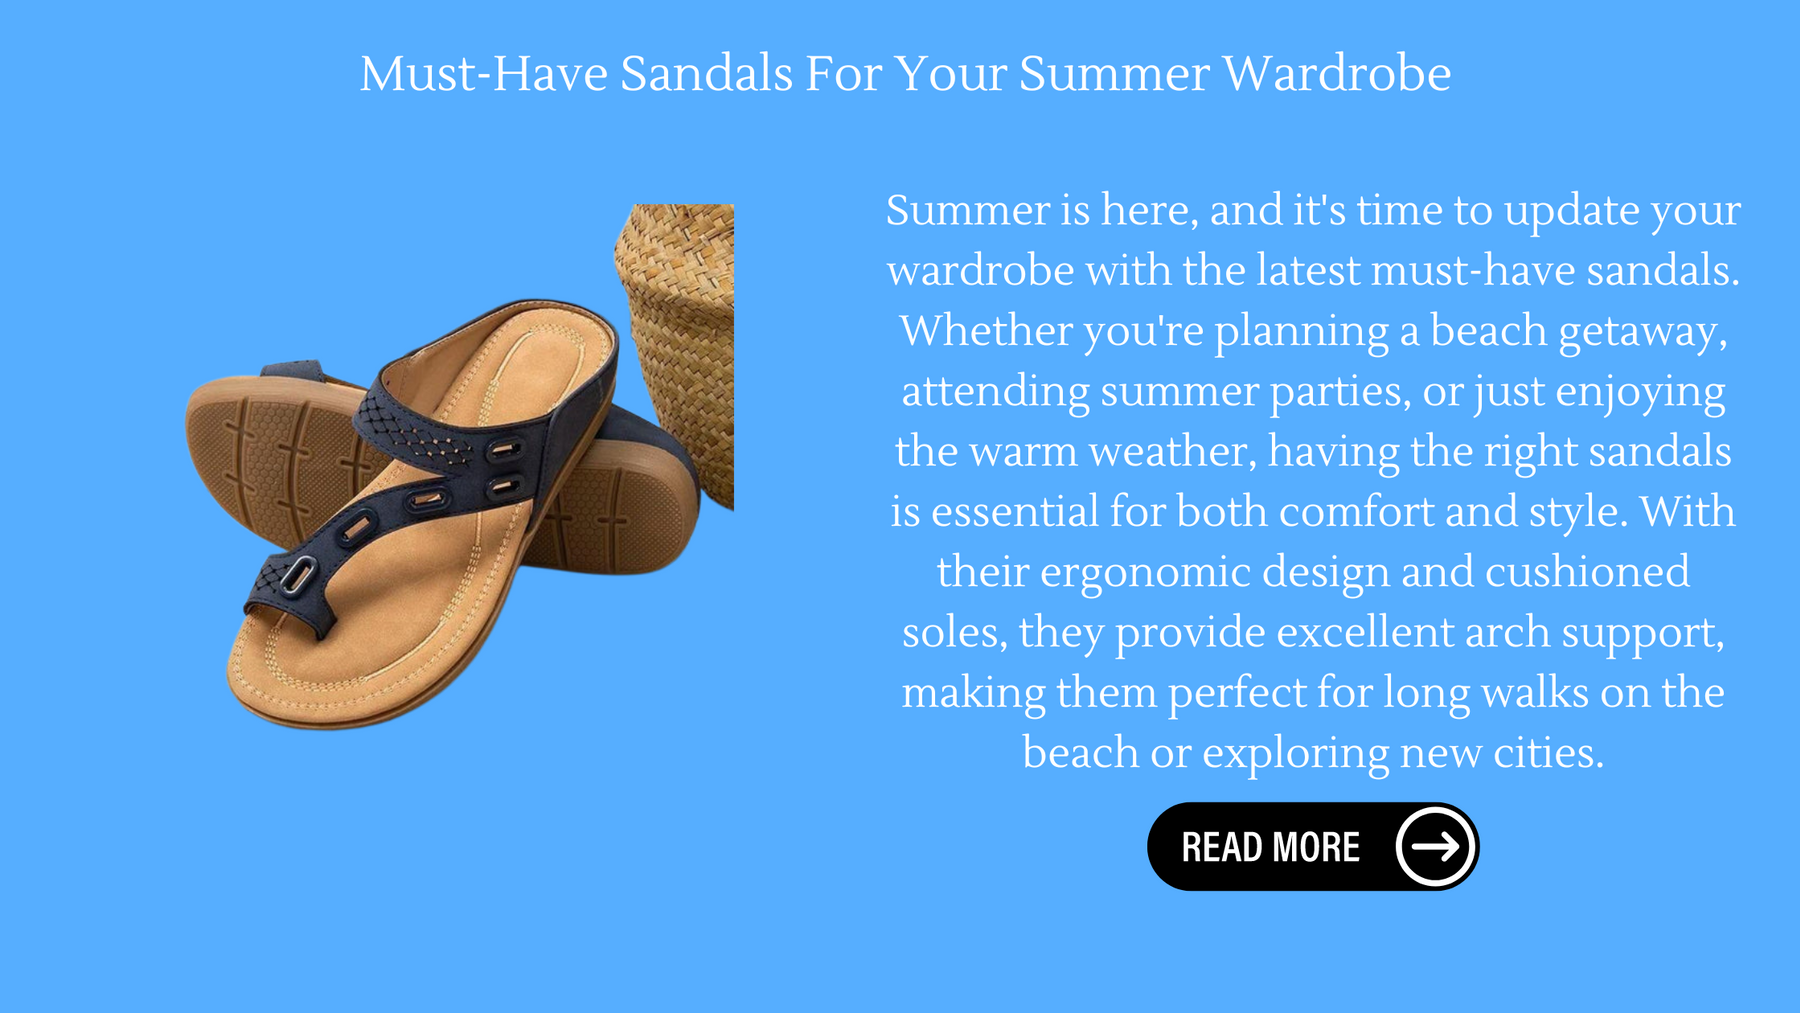 Must-Have Sandals For Your Summer Wardrobe